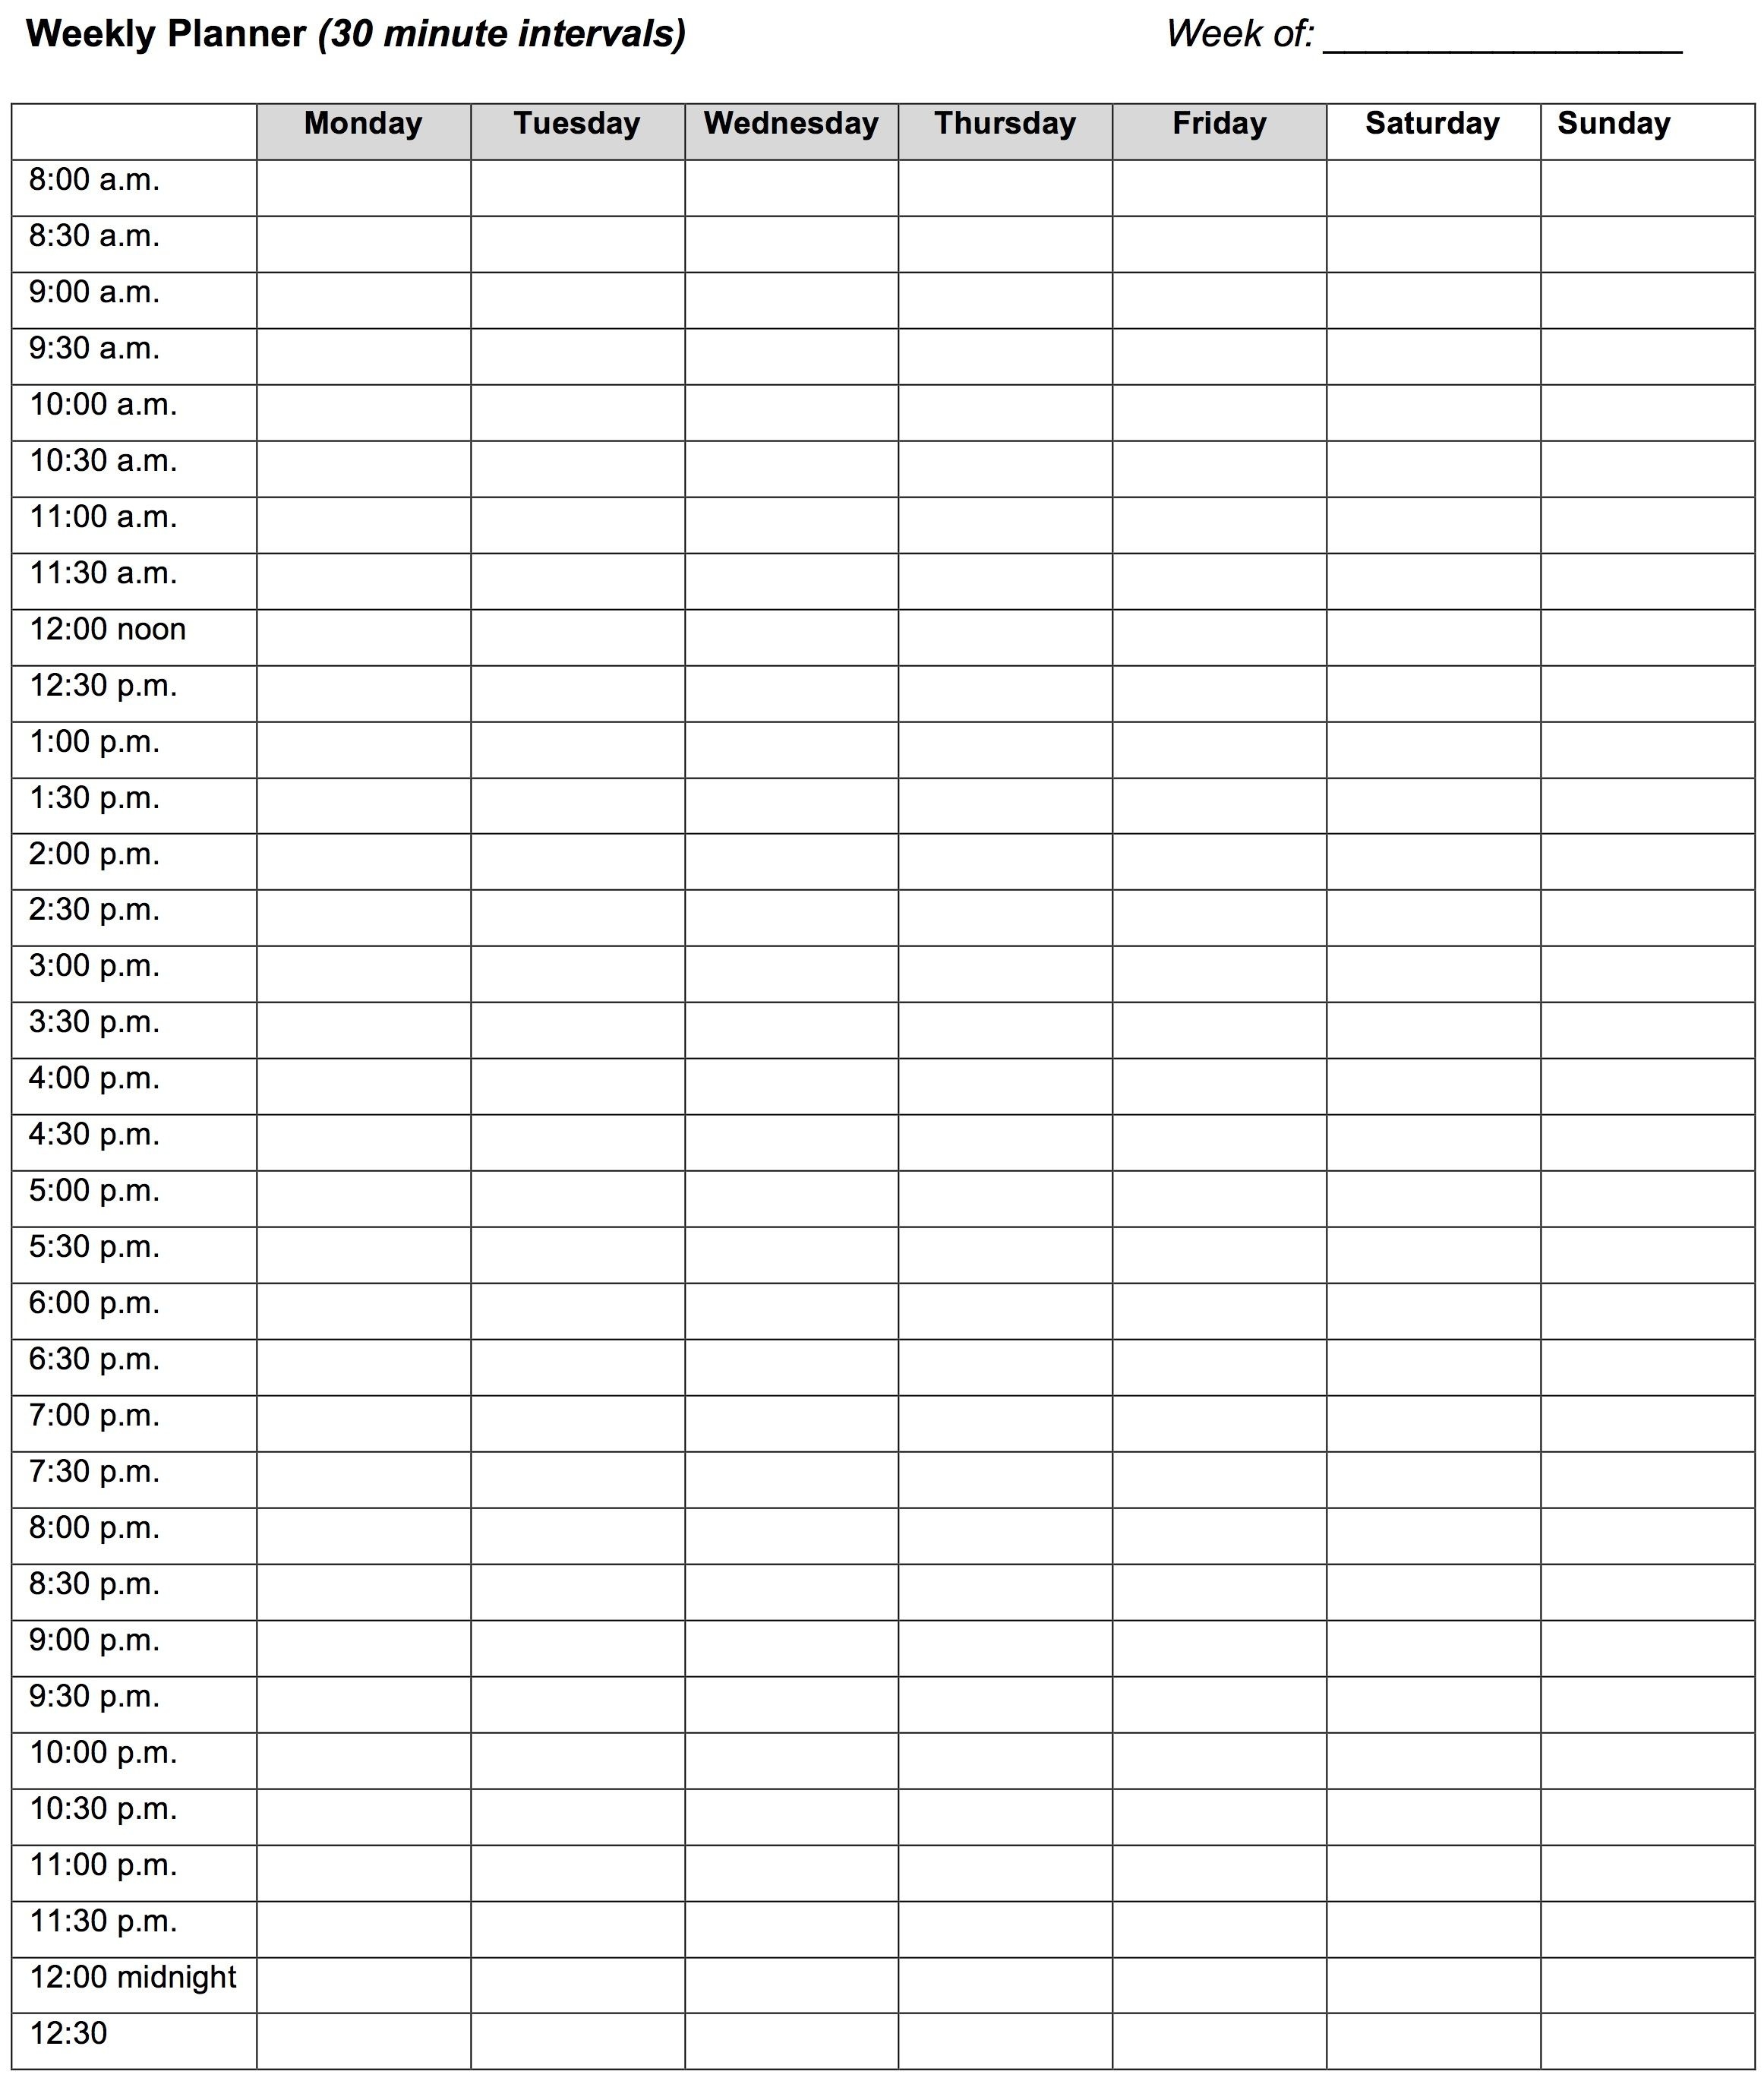 Weekly Planner 30 Minute Intervals With Daily Calendar with regard to 30 Day Calendars Free Printable